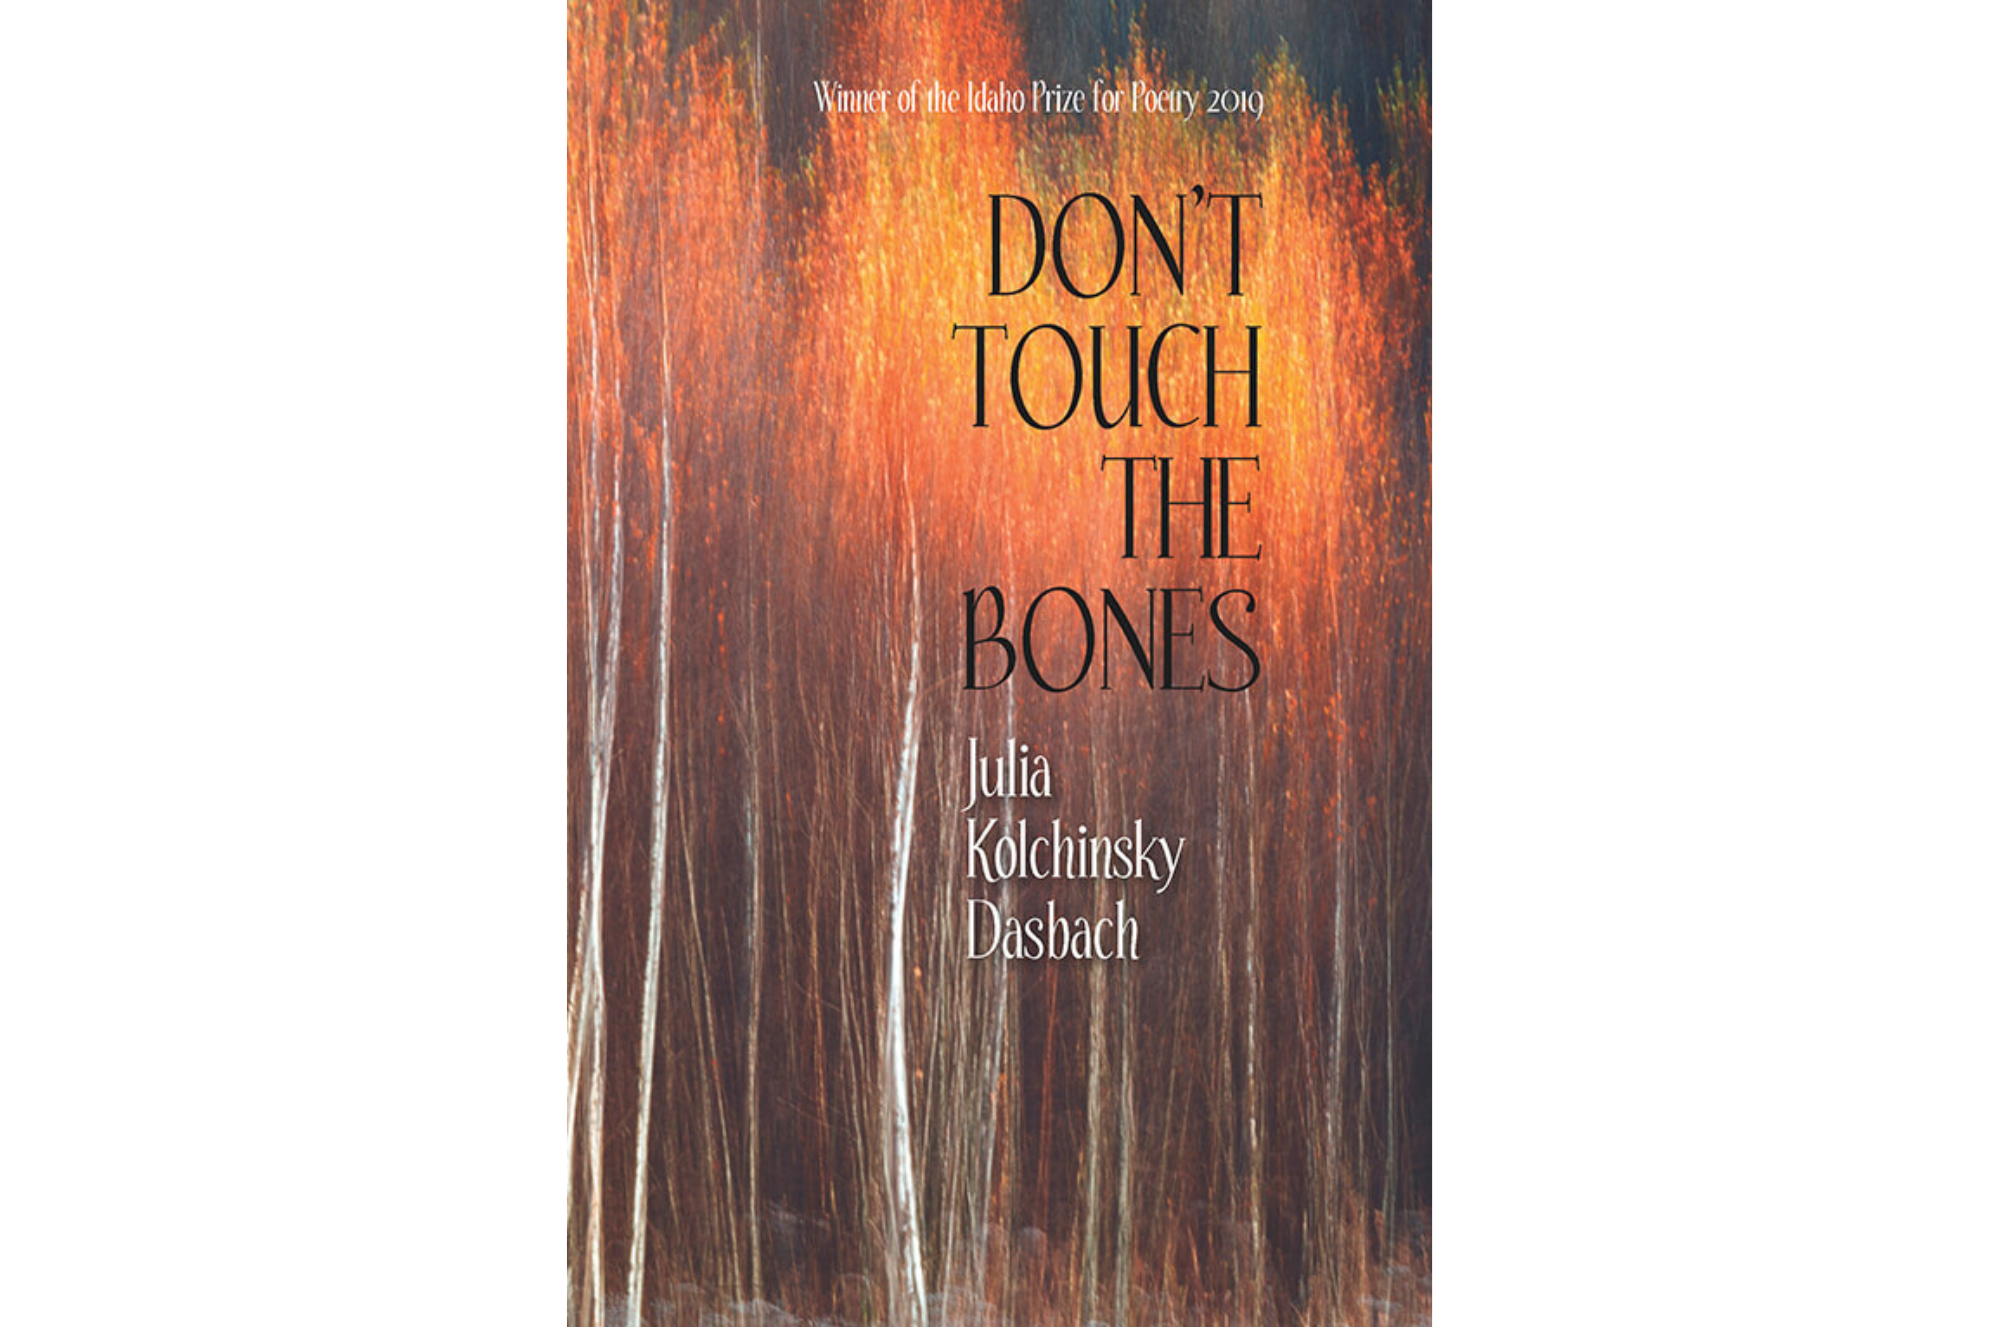 Poetry for the Bones: Intergenerational Trauma and the Holocaust